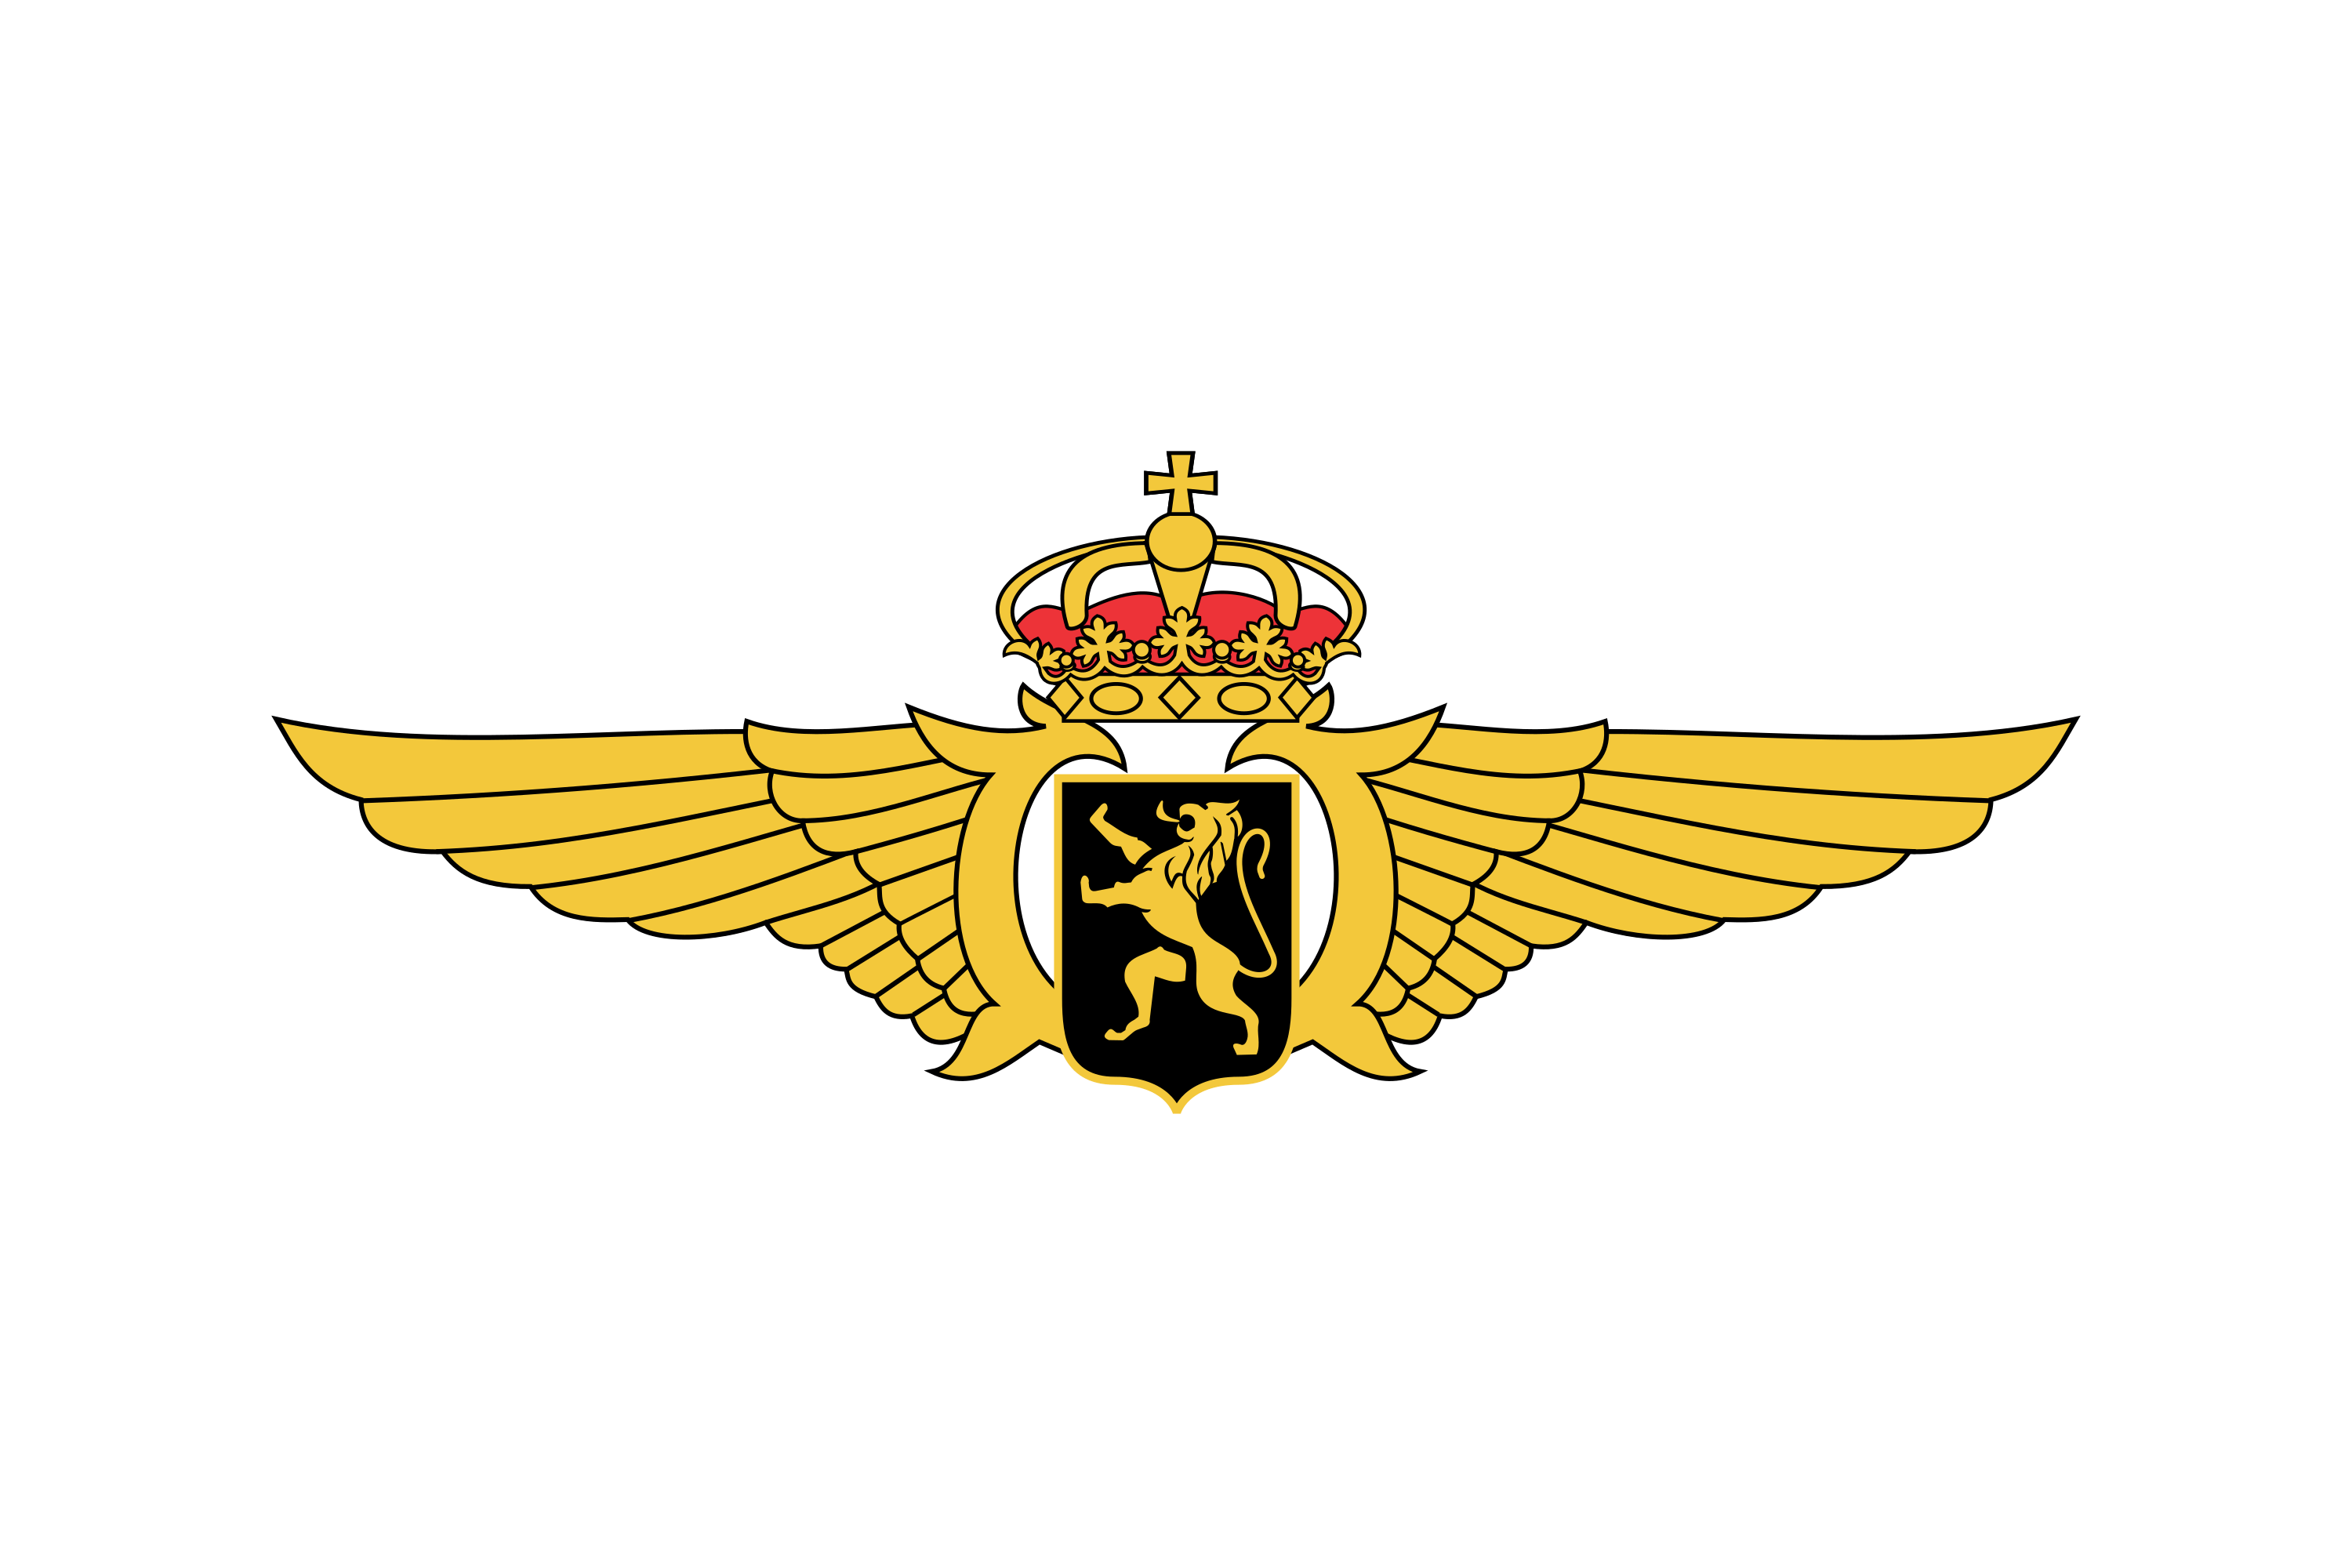 Download Air Component Belgian Air Force Logo In Svg Vector Or Png File Format Logo Wine